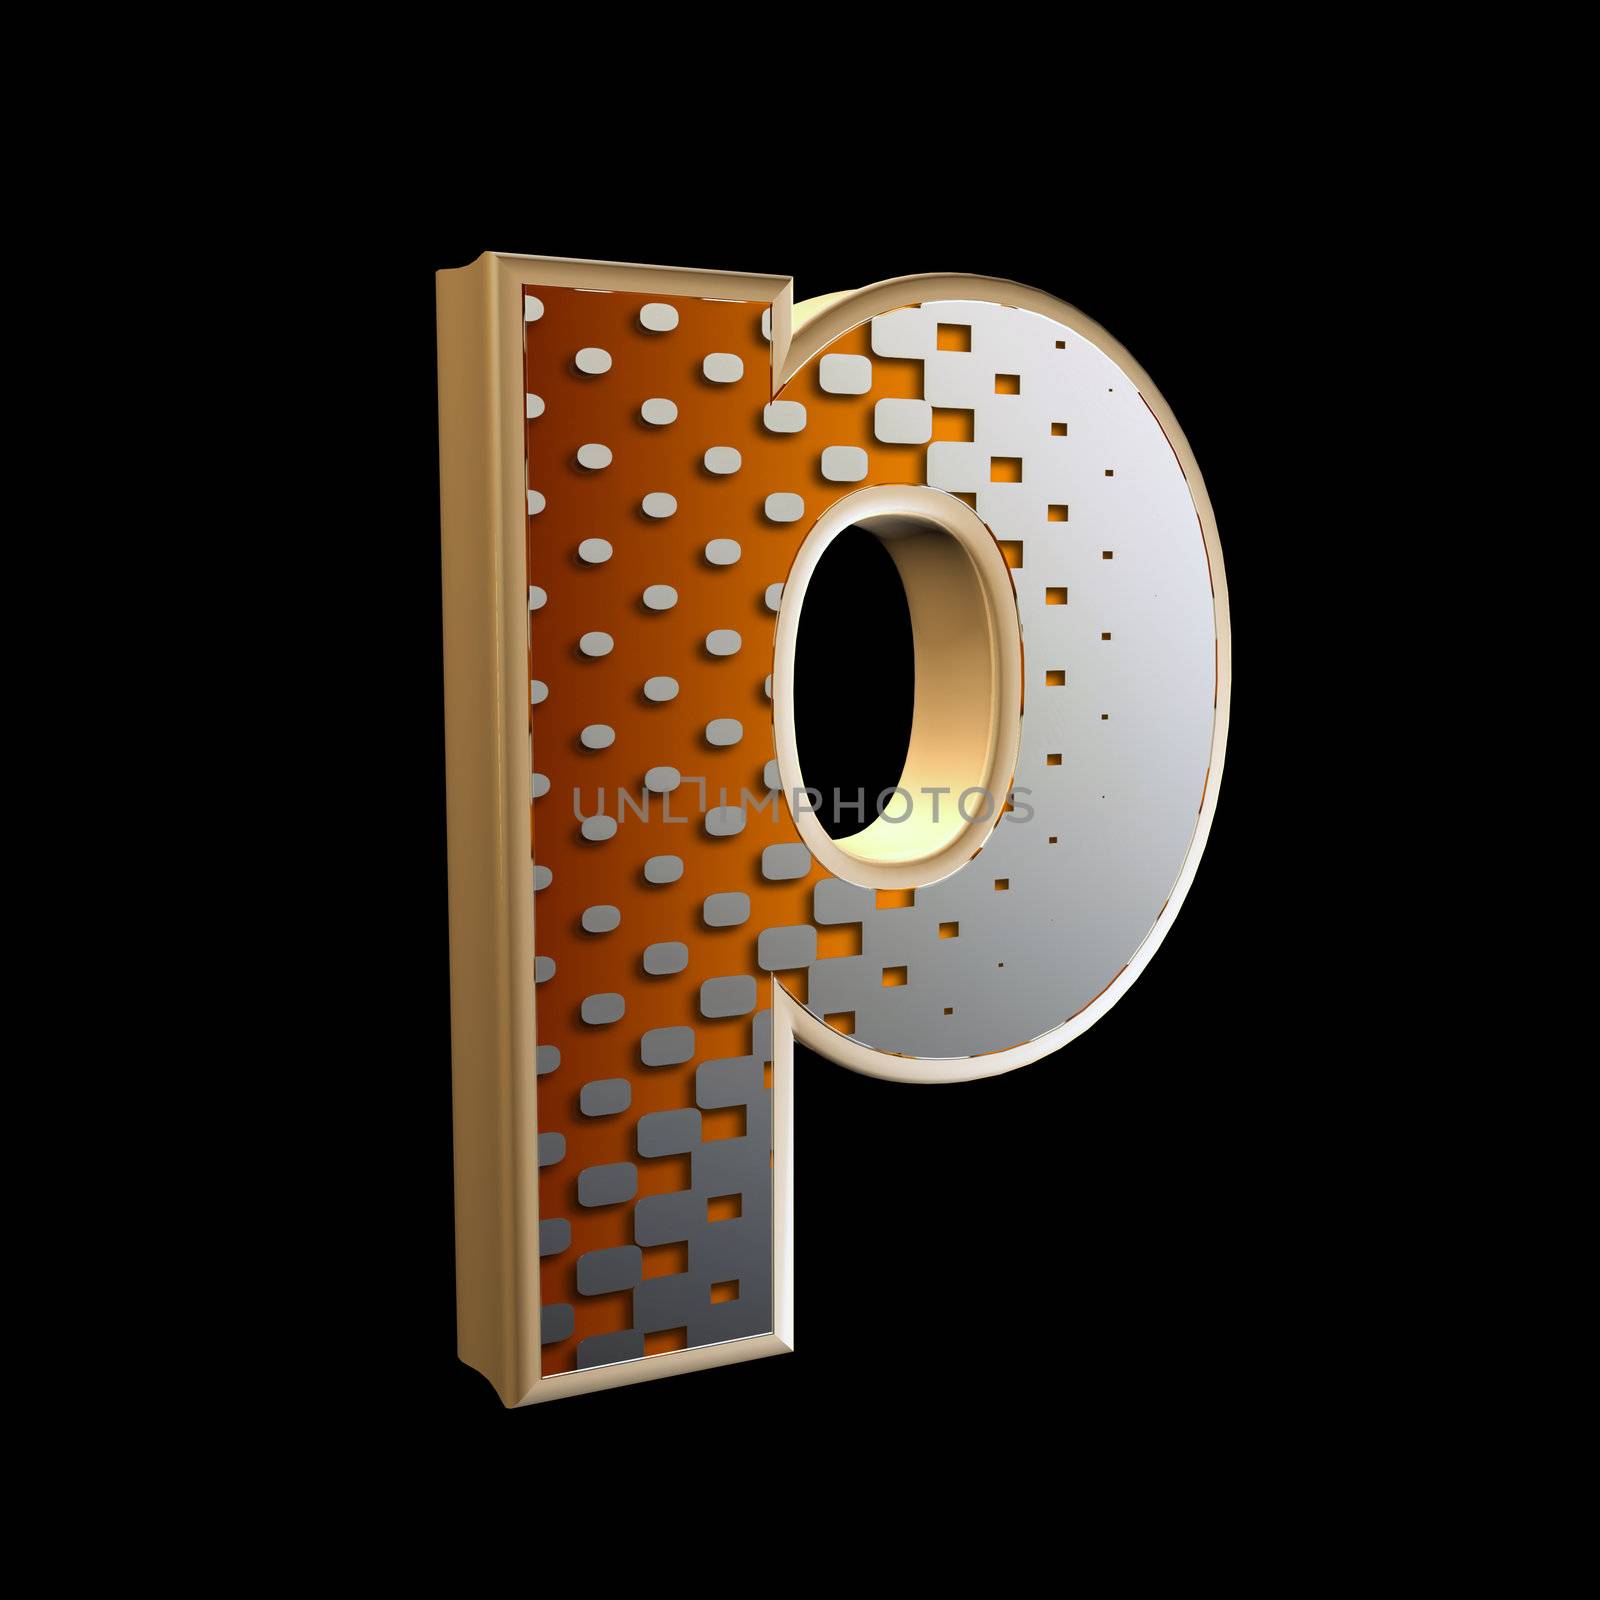 abstract 3d letter with halftone texture - p